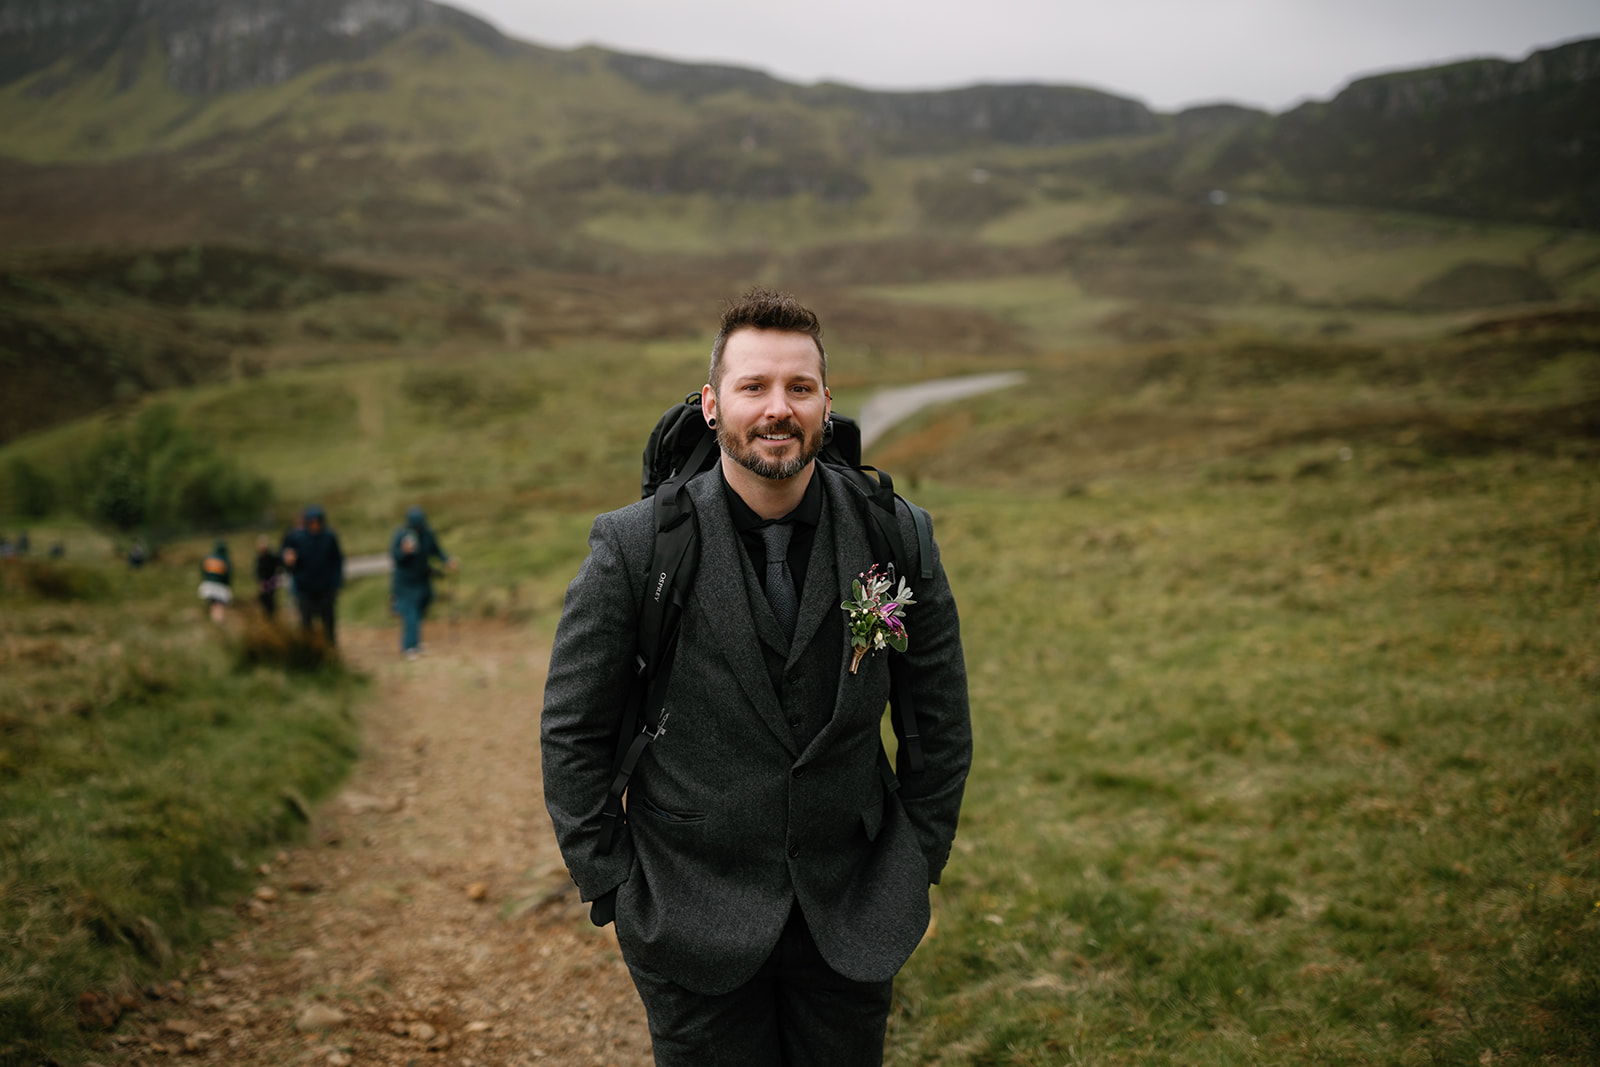 Nick hikes for his Isle of Skye elopement ceremony